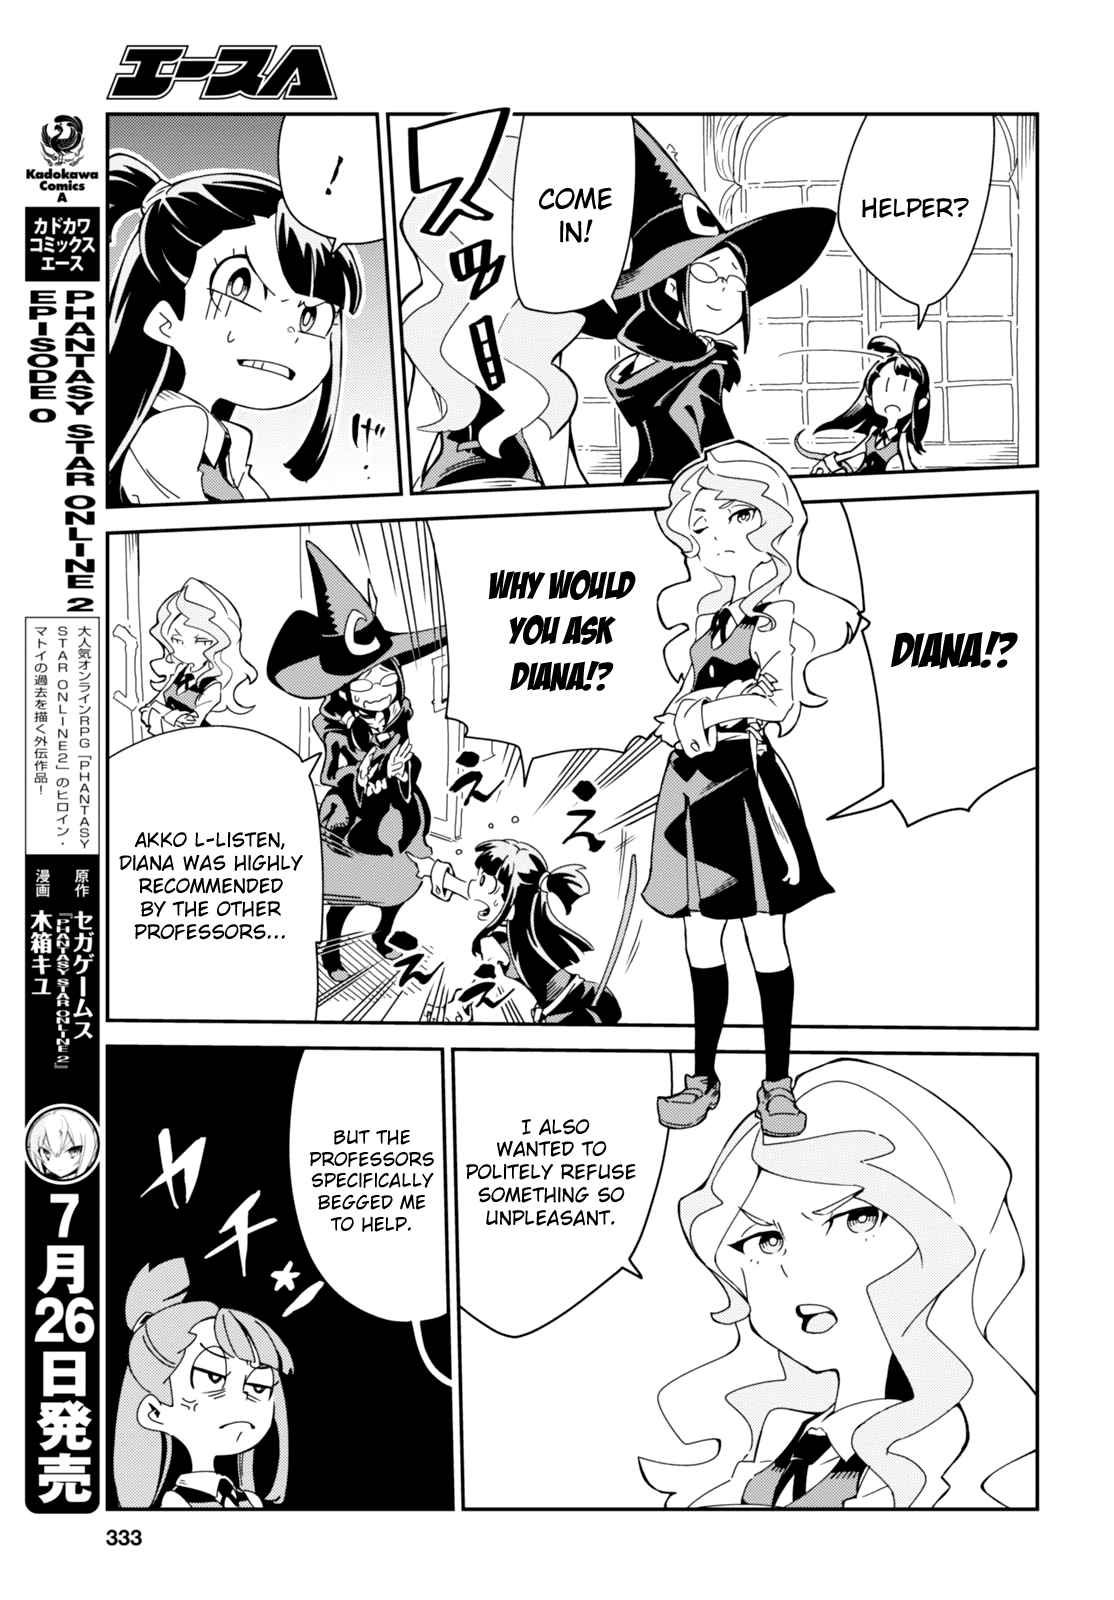 Little Witch Academia Vol. 2 Ch. 7